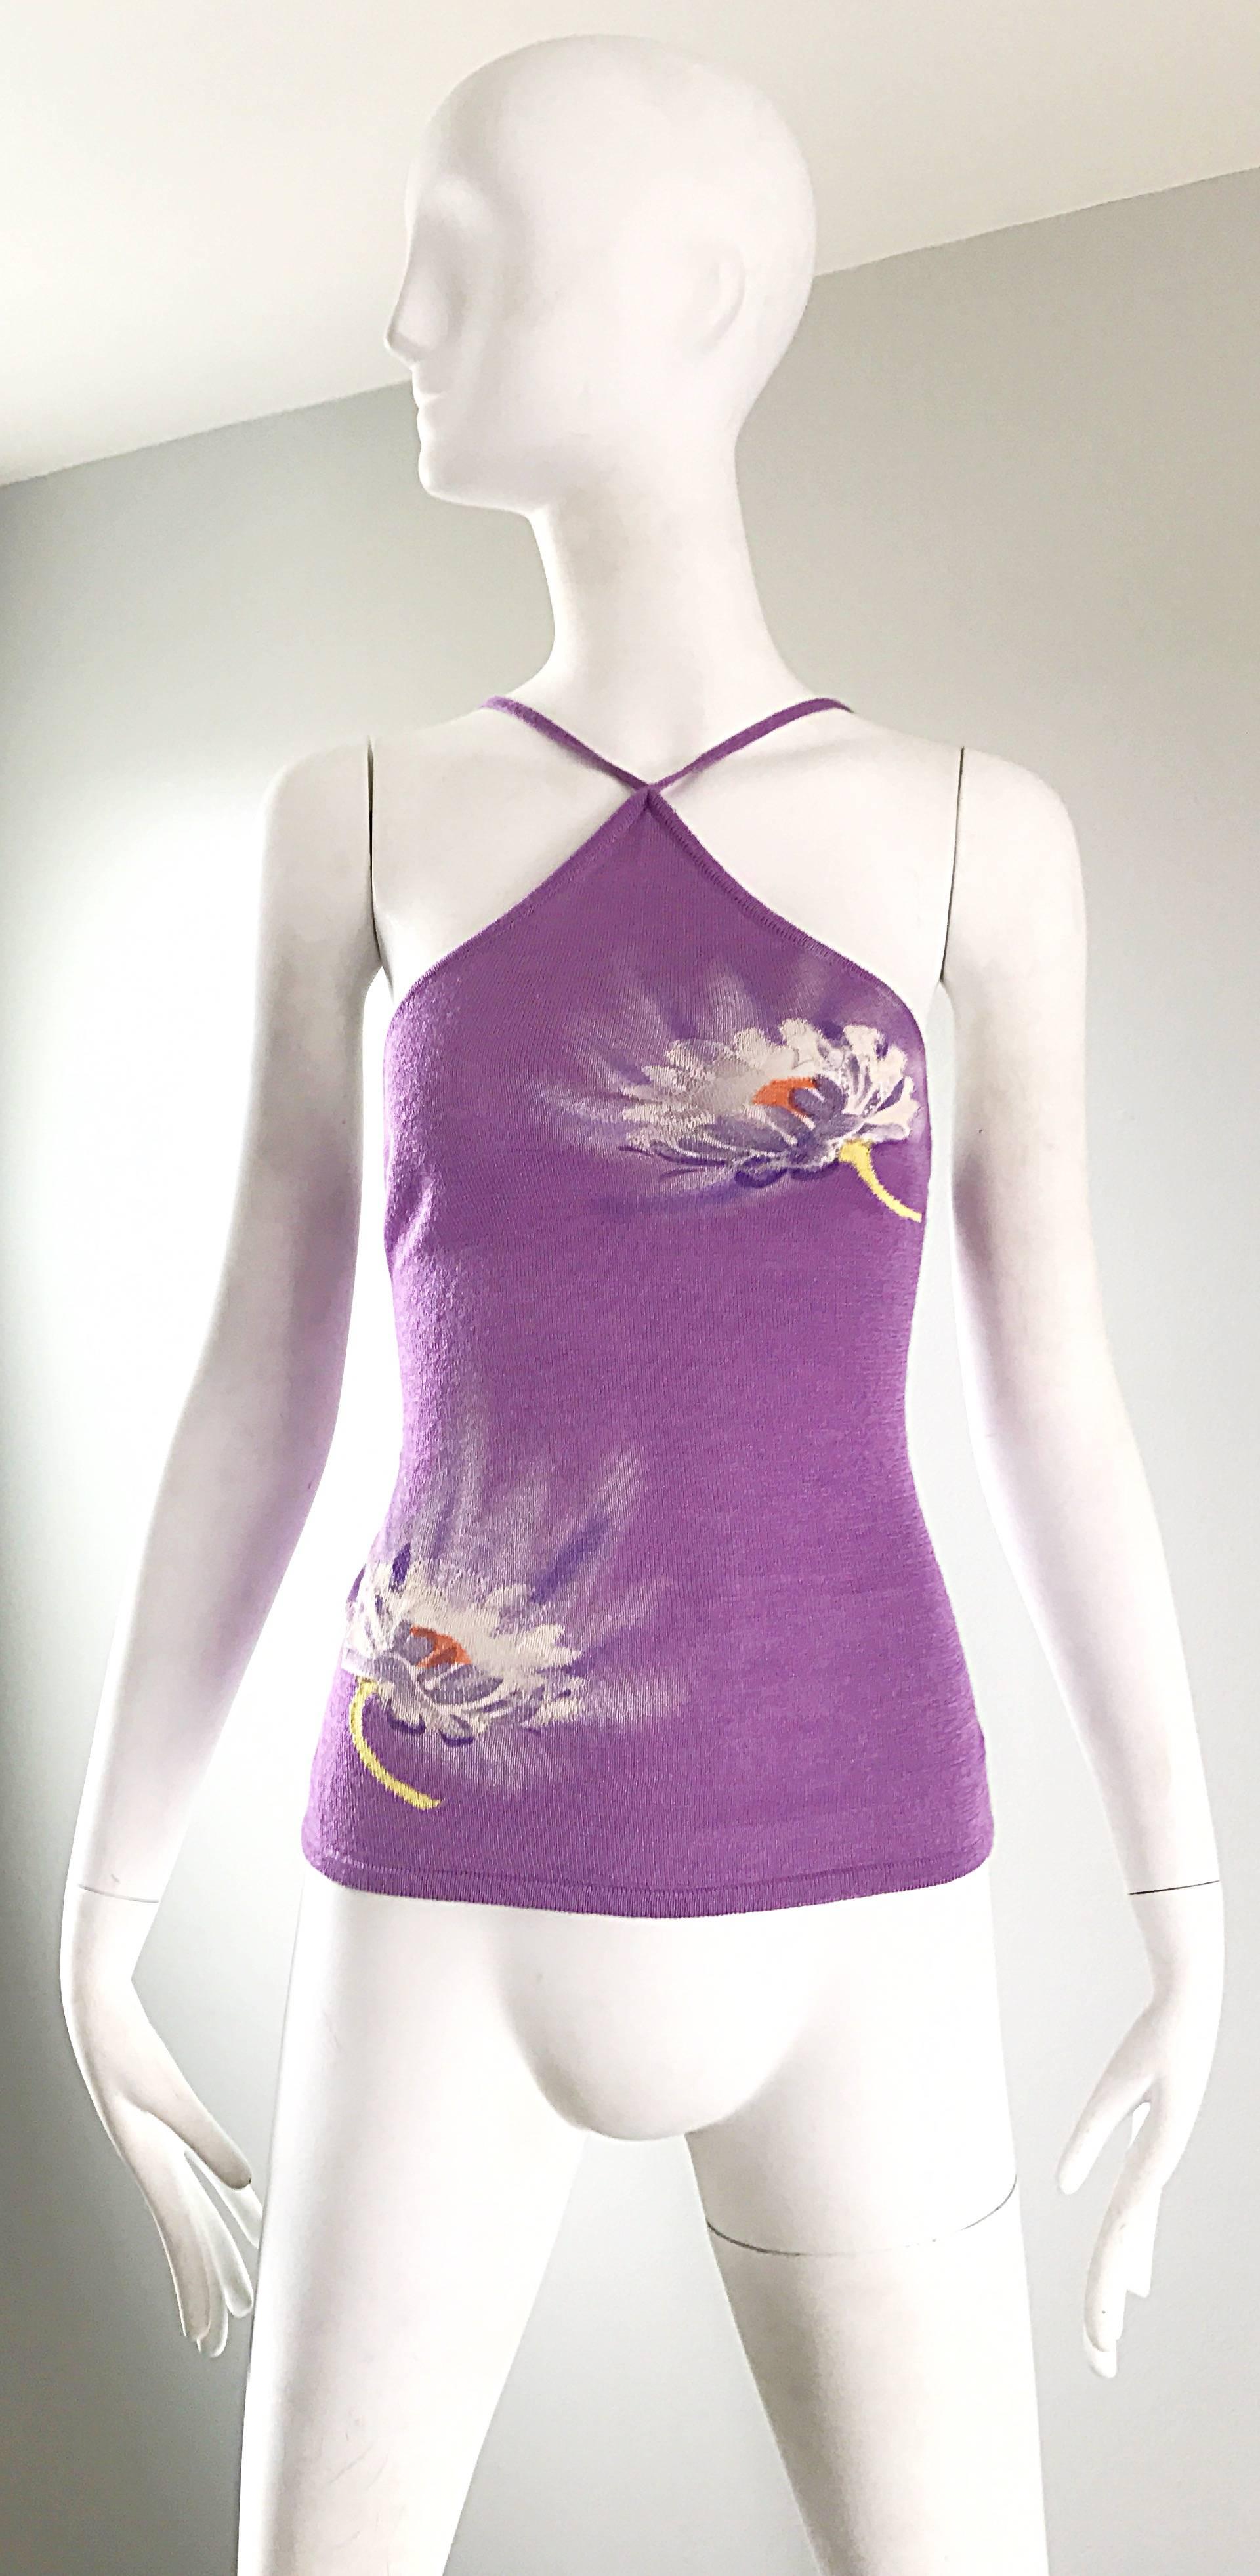 Incredible Spring 92 collectible pre-death 90s GIANNI VERSACE COUTURE lilac purple hand woven rayon halter top! Feauters 3-D hand-woven flower print in purple, white, orange and yellow. Signature 1990s flattering fit that stretches to fit the body.